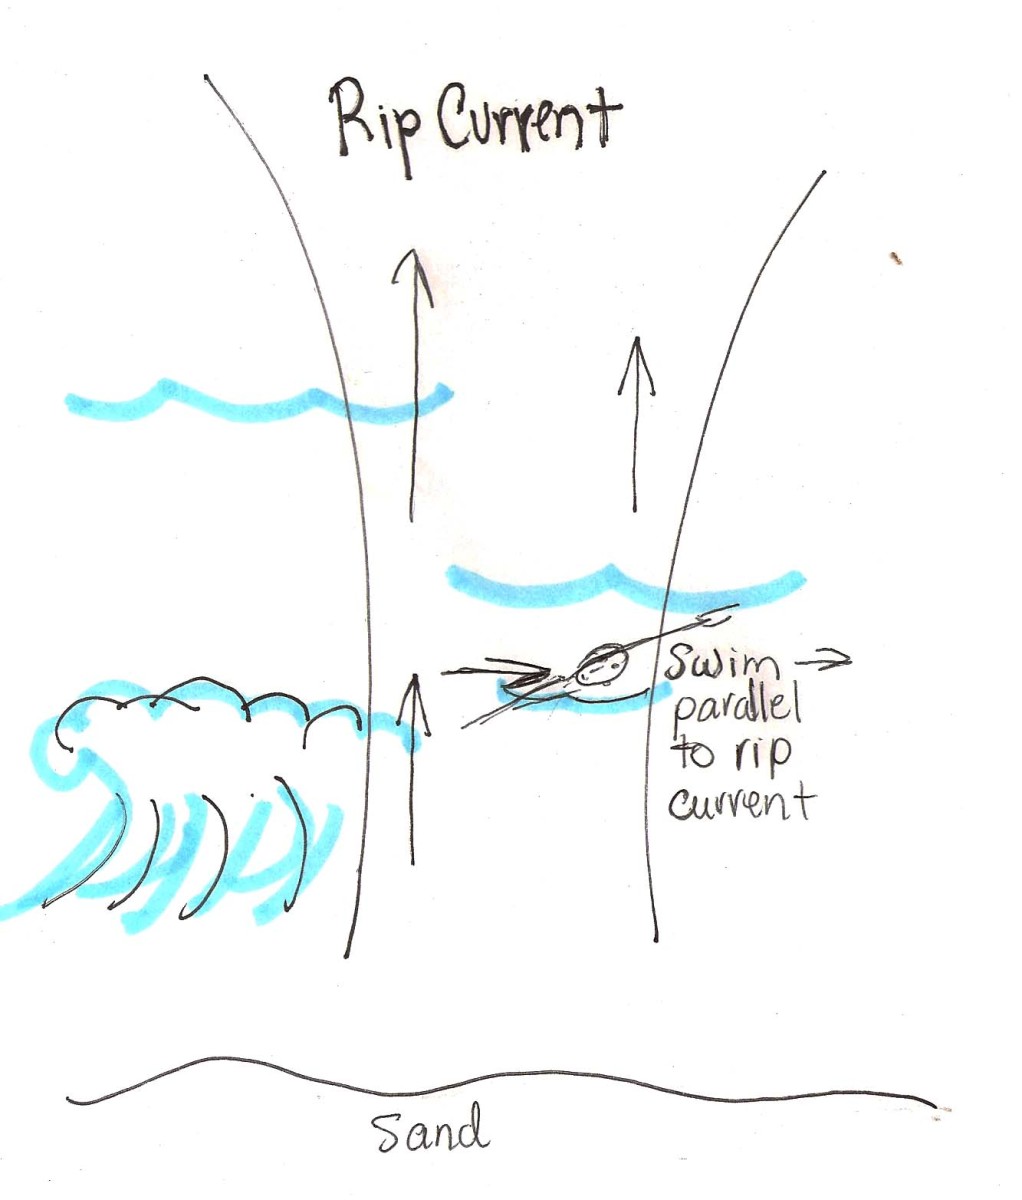 Rip current - if you find yourself being pulled out to sea by a rip current, swim parallel to the shore